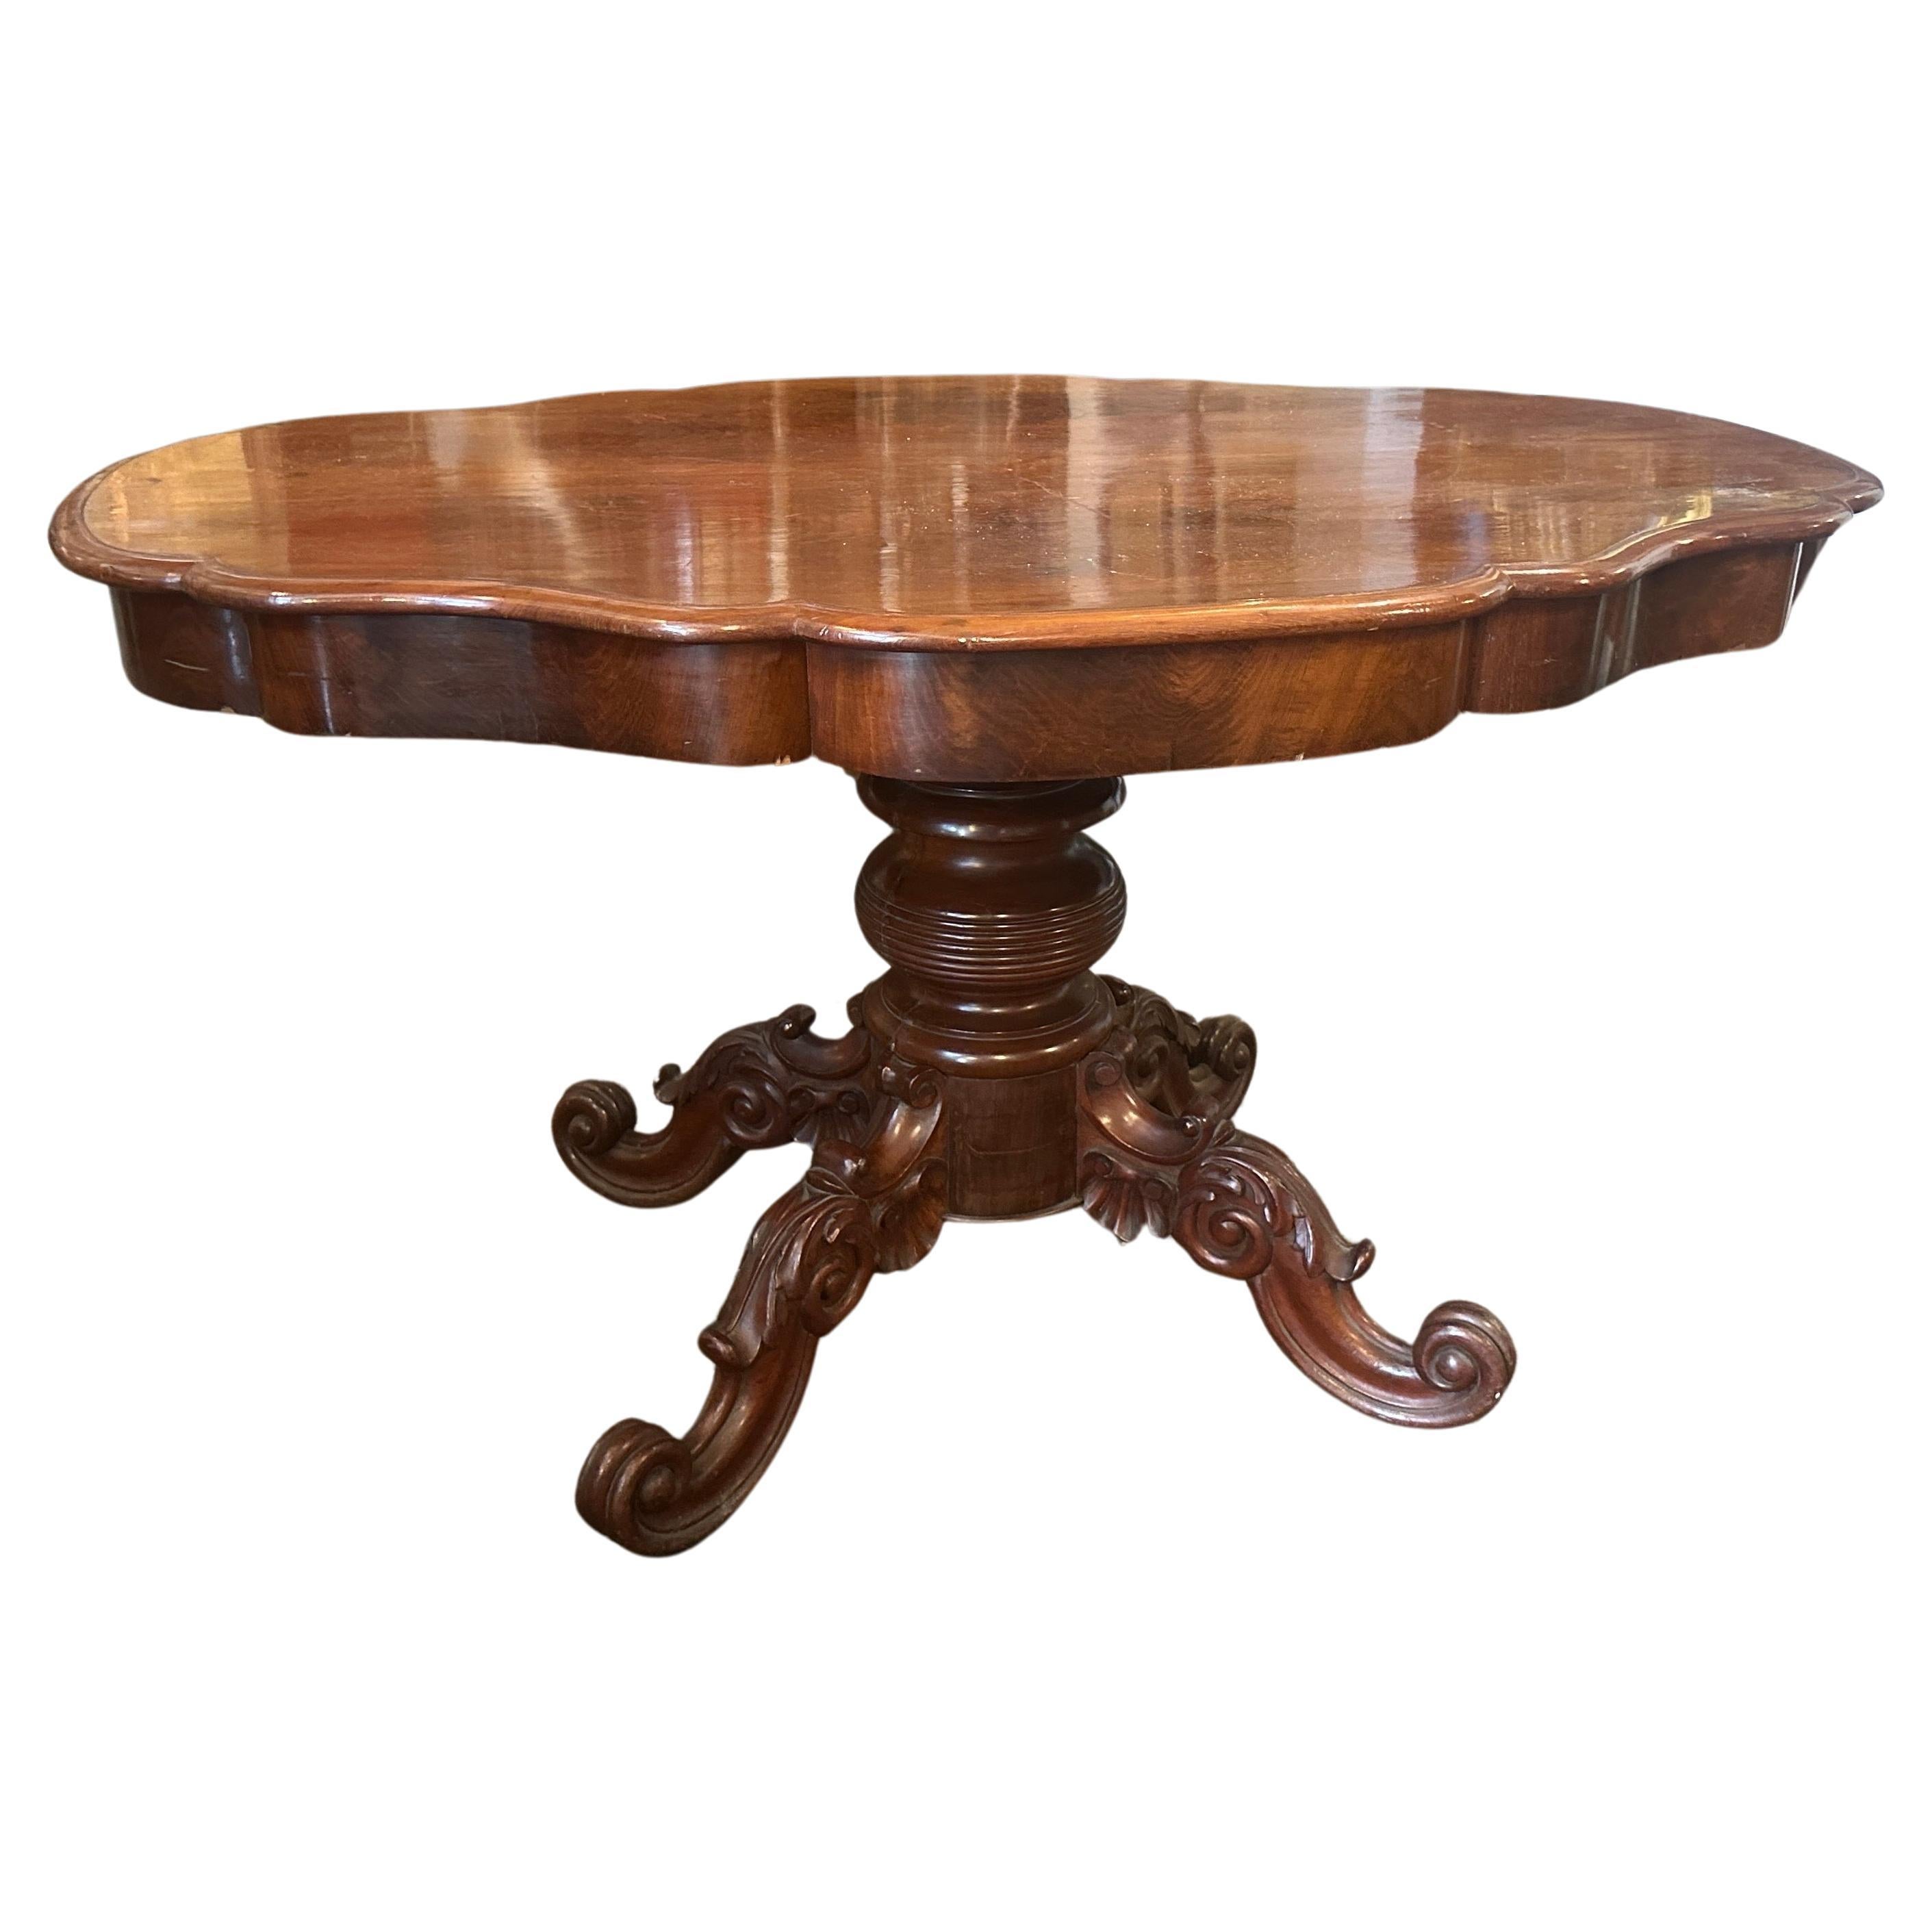 1880s Louis Philippe Mahogany Feather Turtle Shell Shaped Sicilian Side Table For Sale